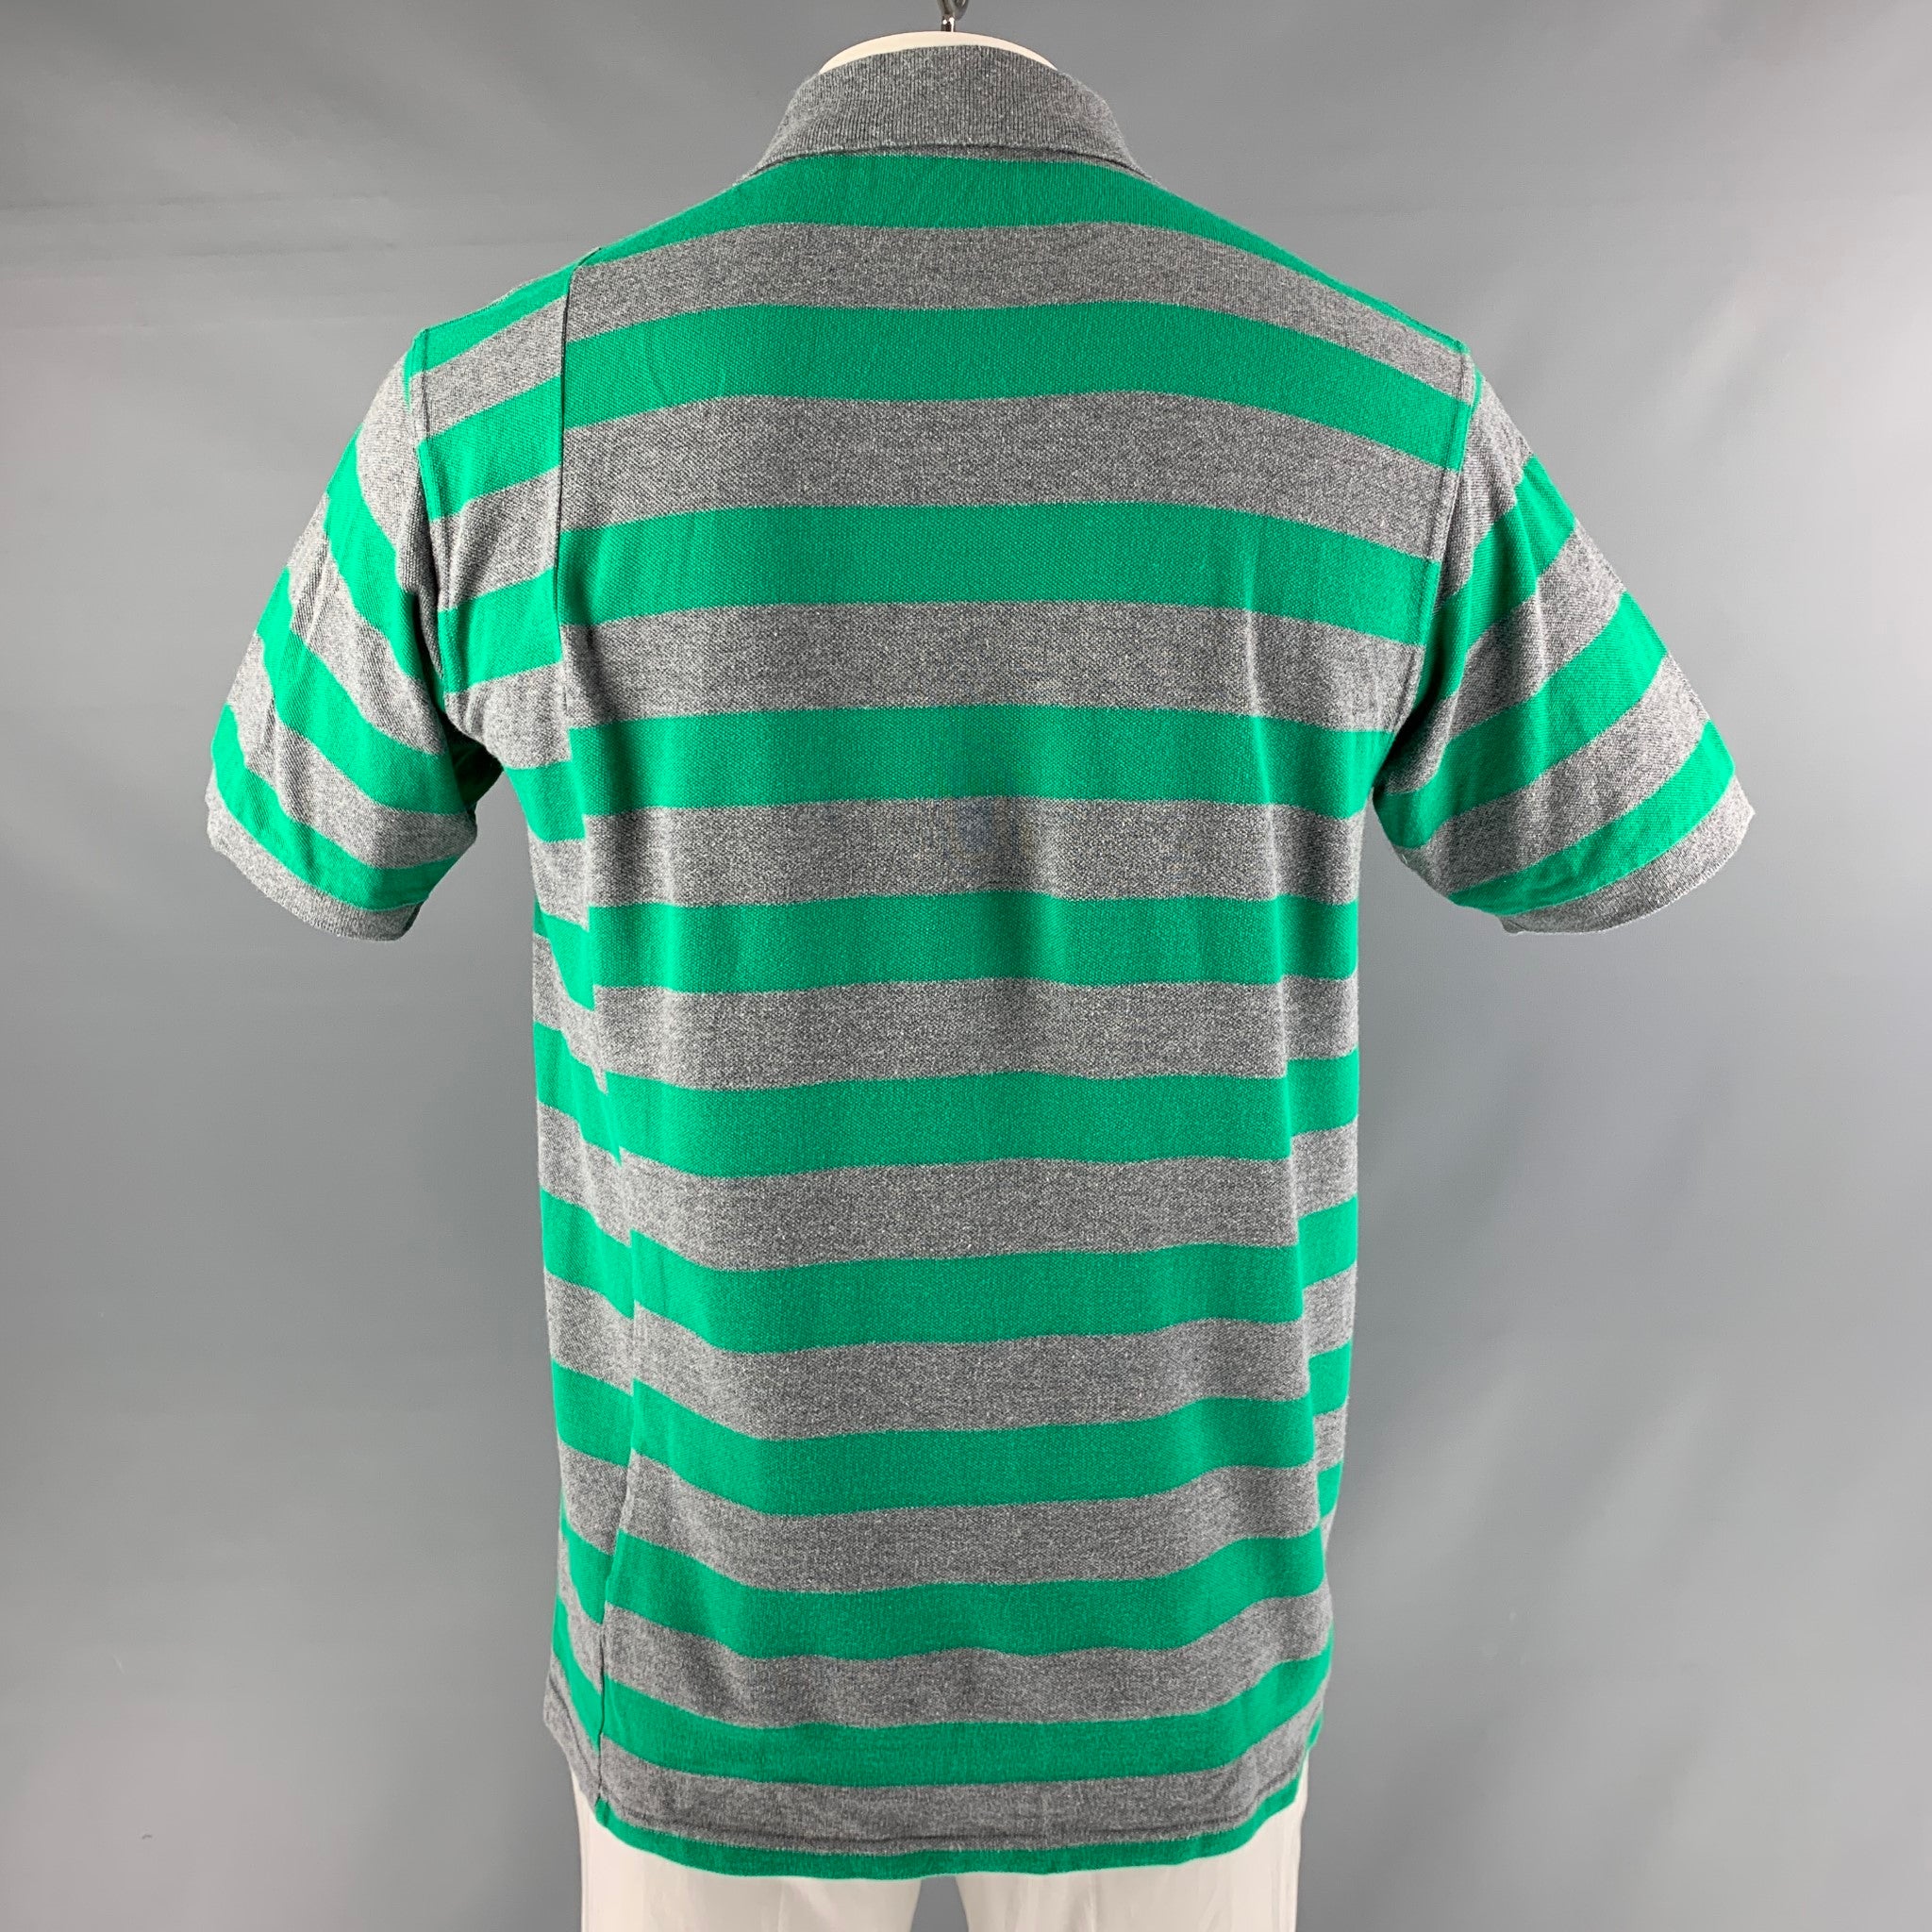 FRED PERRY x COMME des GARCONS SHIRT Size L Green Grey Stripe Cotton  Buttoned Polo